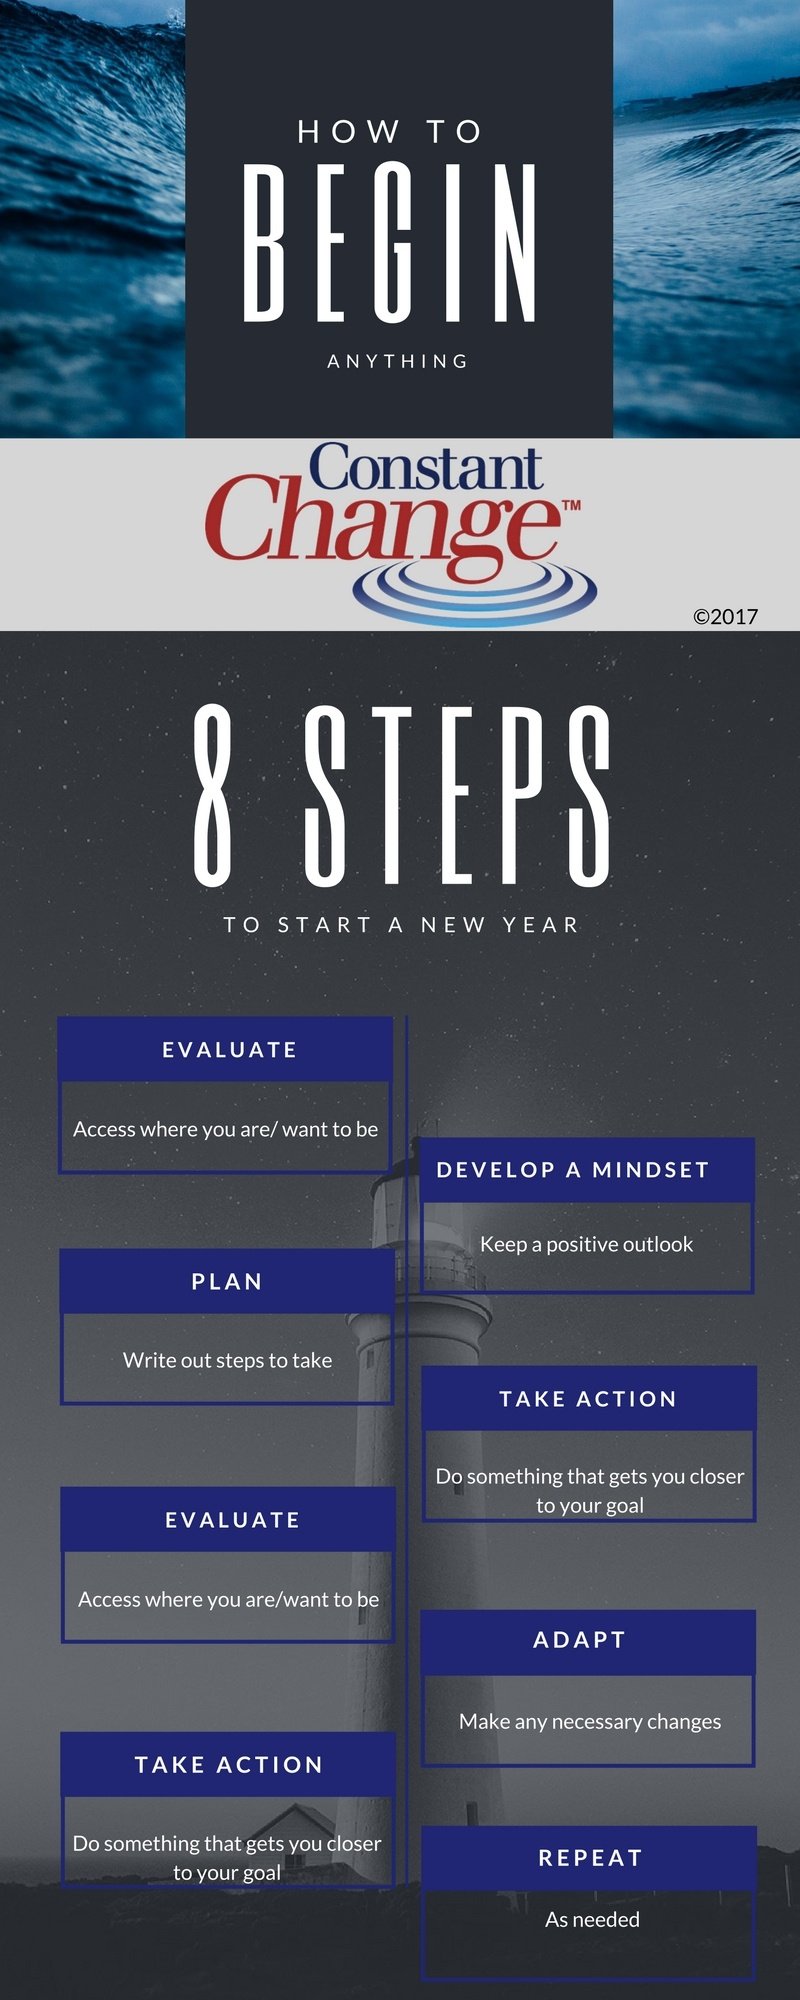 8 steps to begin anything Michelle A. Homme